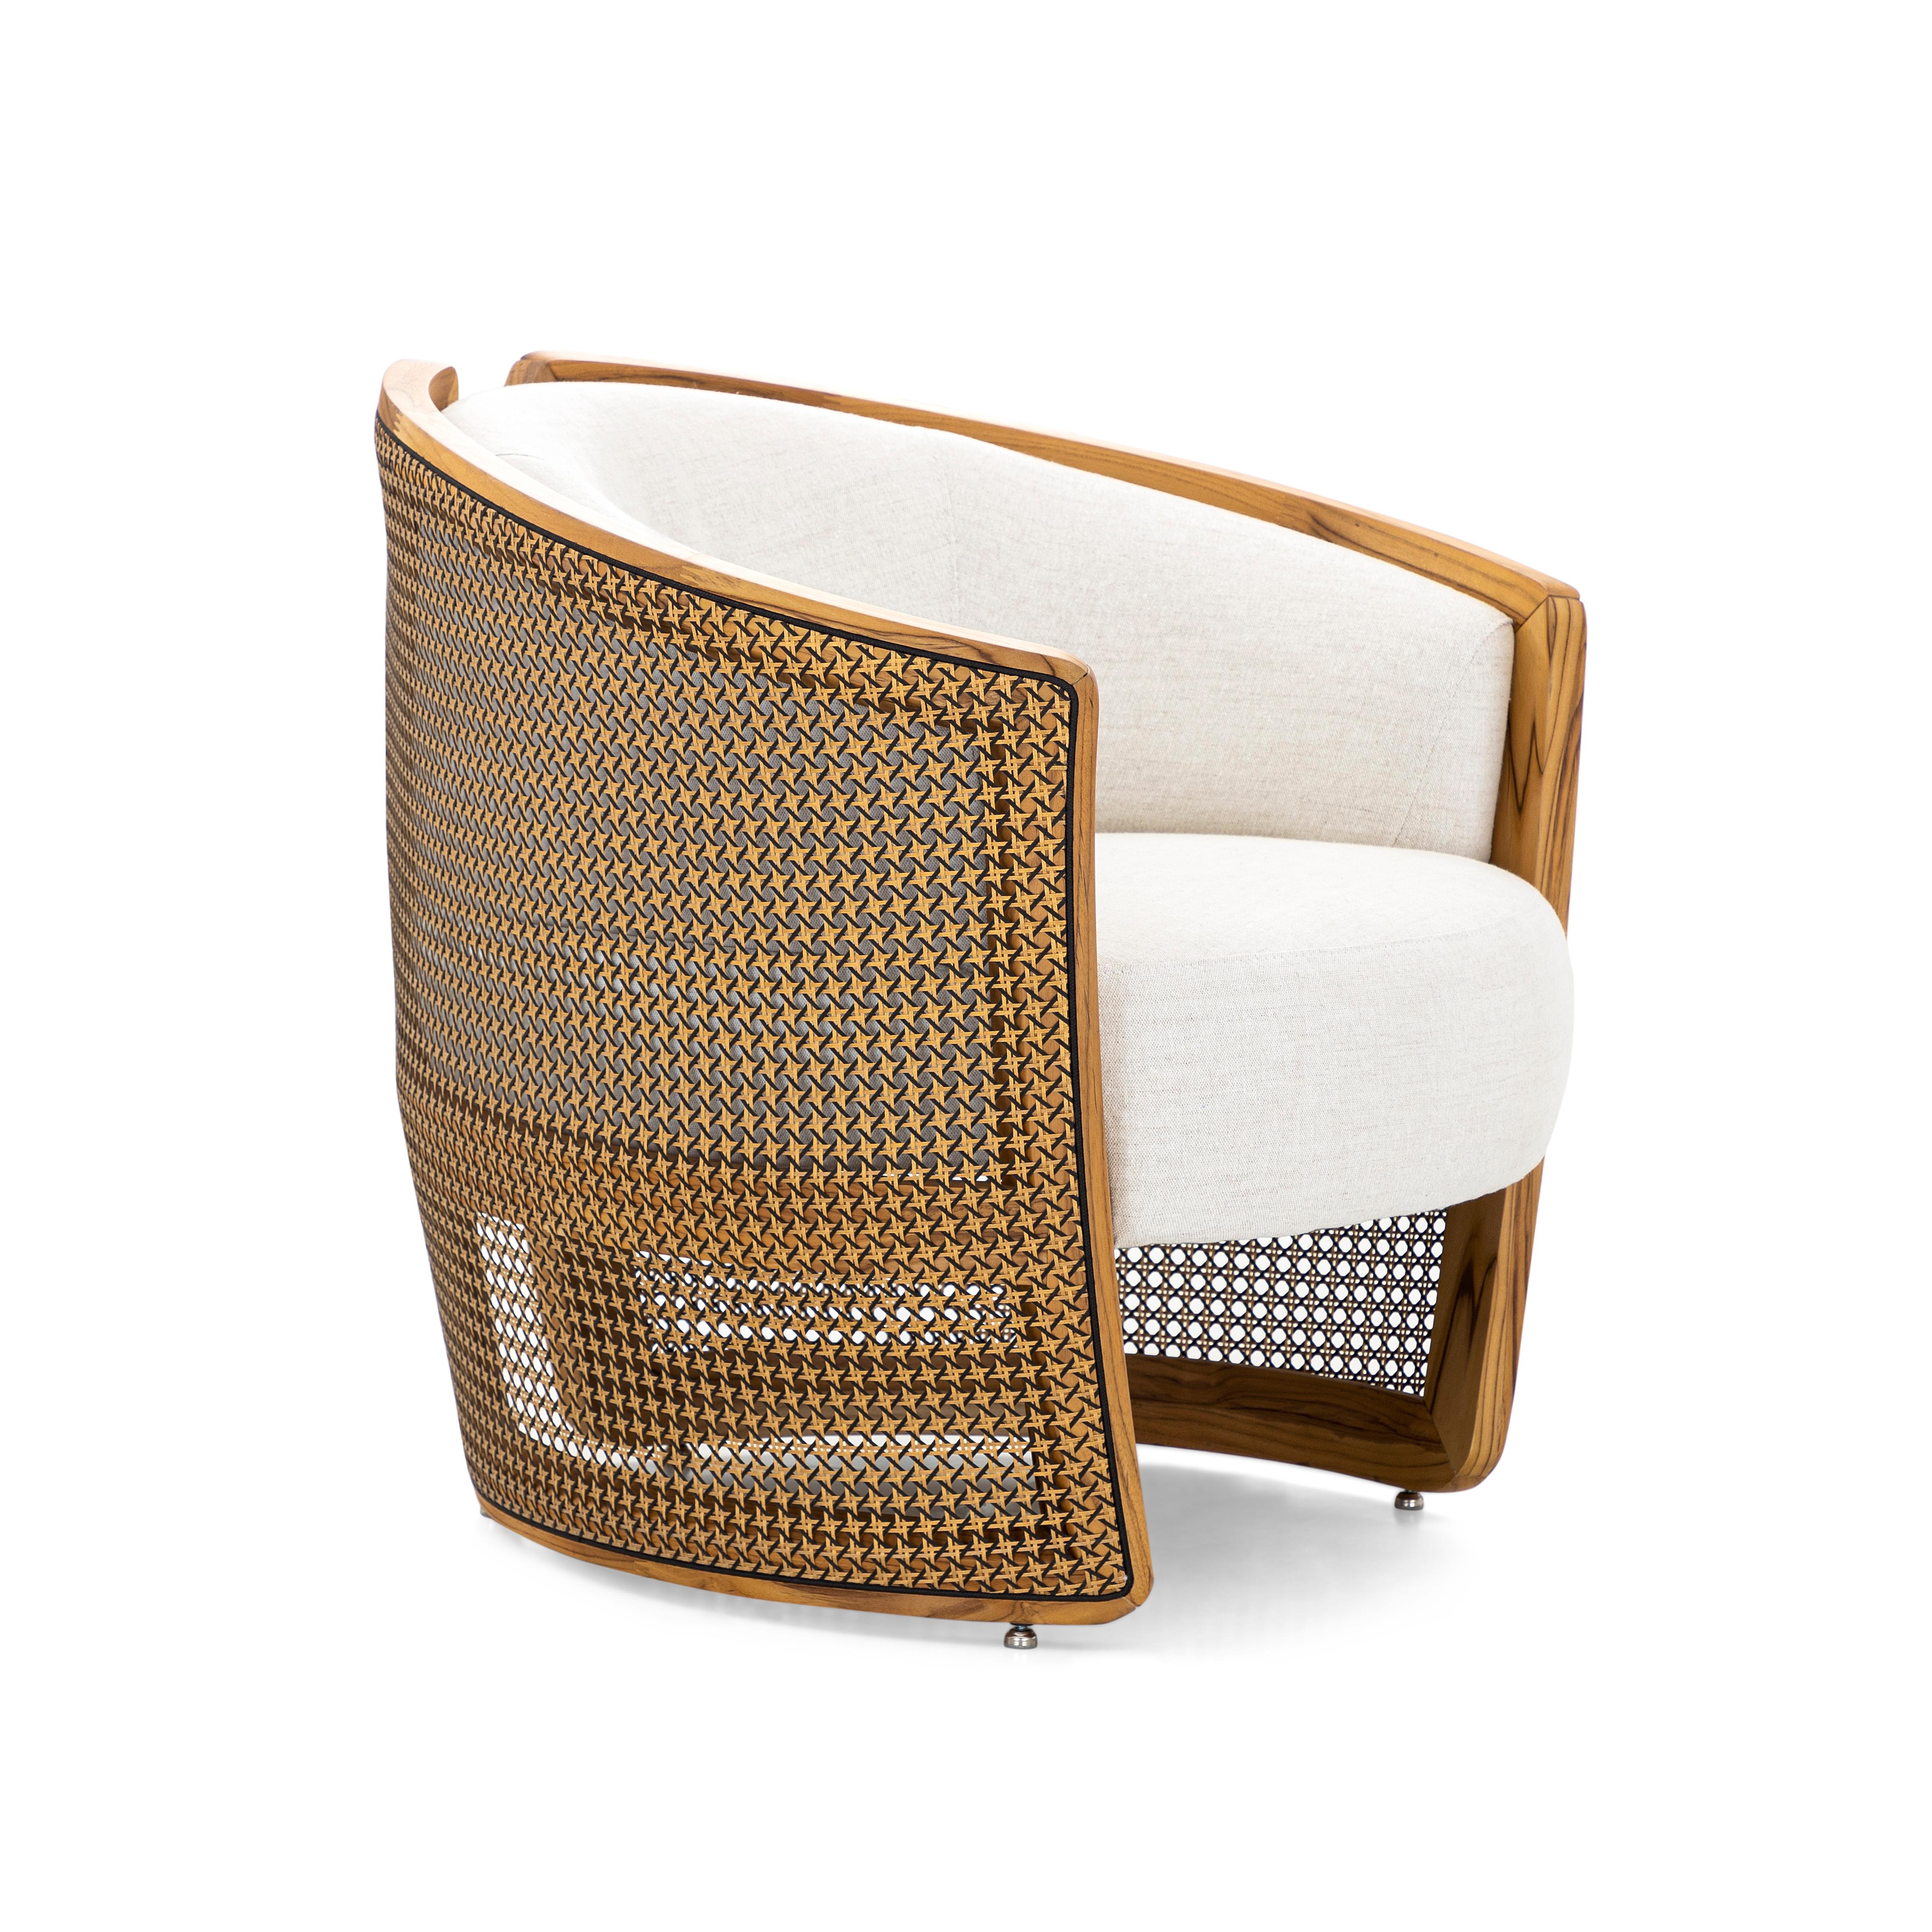 Brazilian Lirio Accent Chair in Teak Wood, Cane and Ivory Fabric For Sale